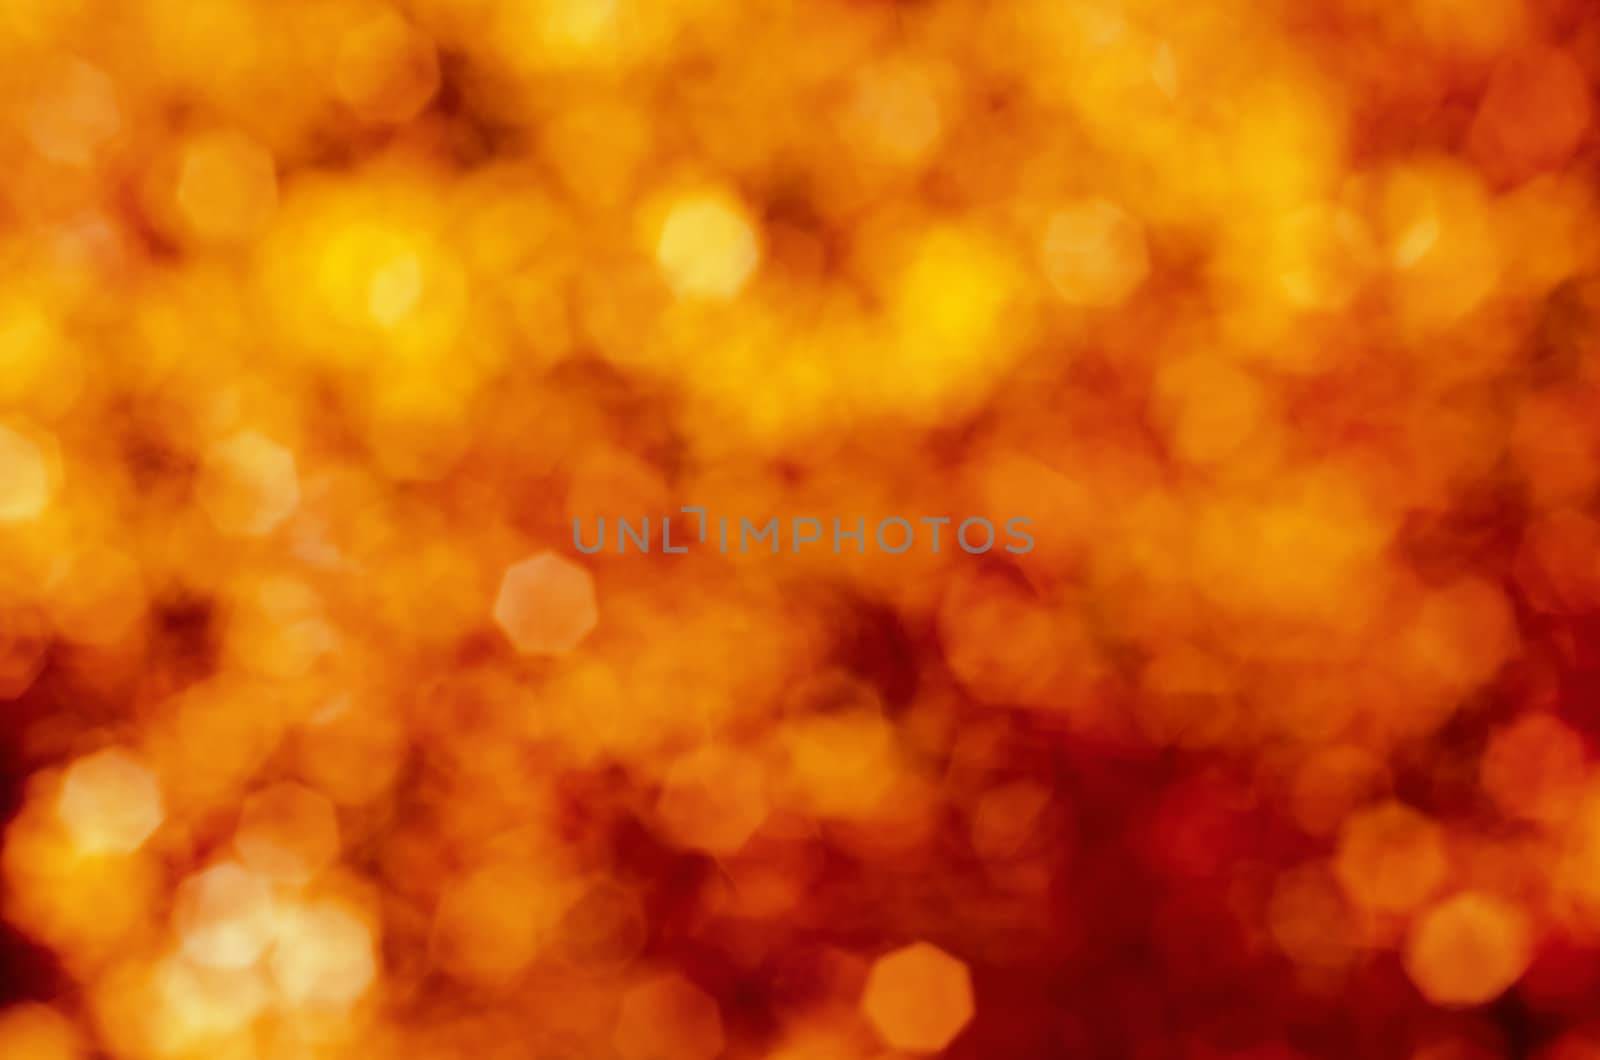 Soft, blurry, photographed bokeh background of reds and yellows, giving a fire-like, explosive effect.  